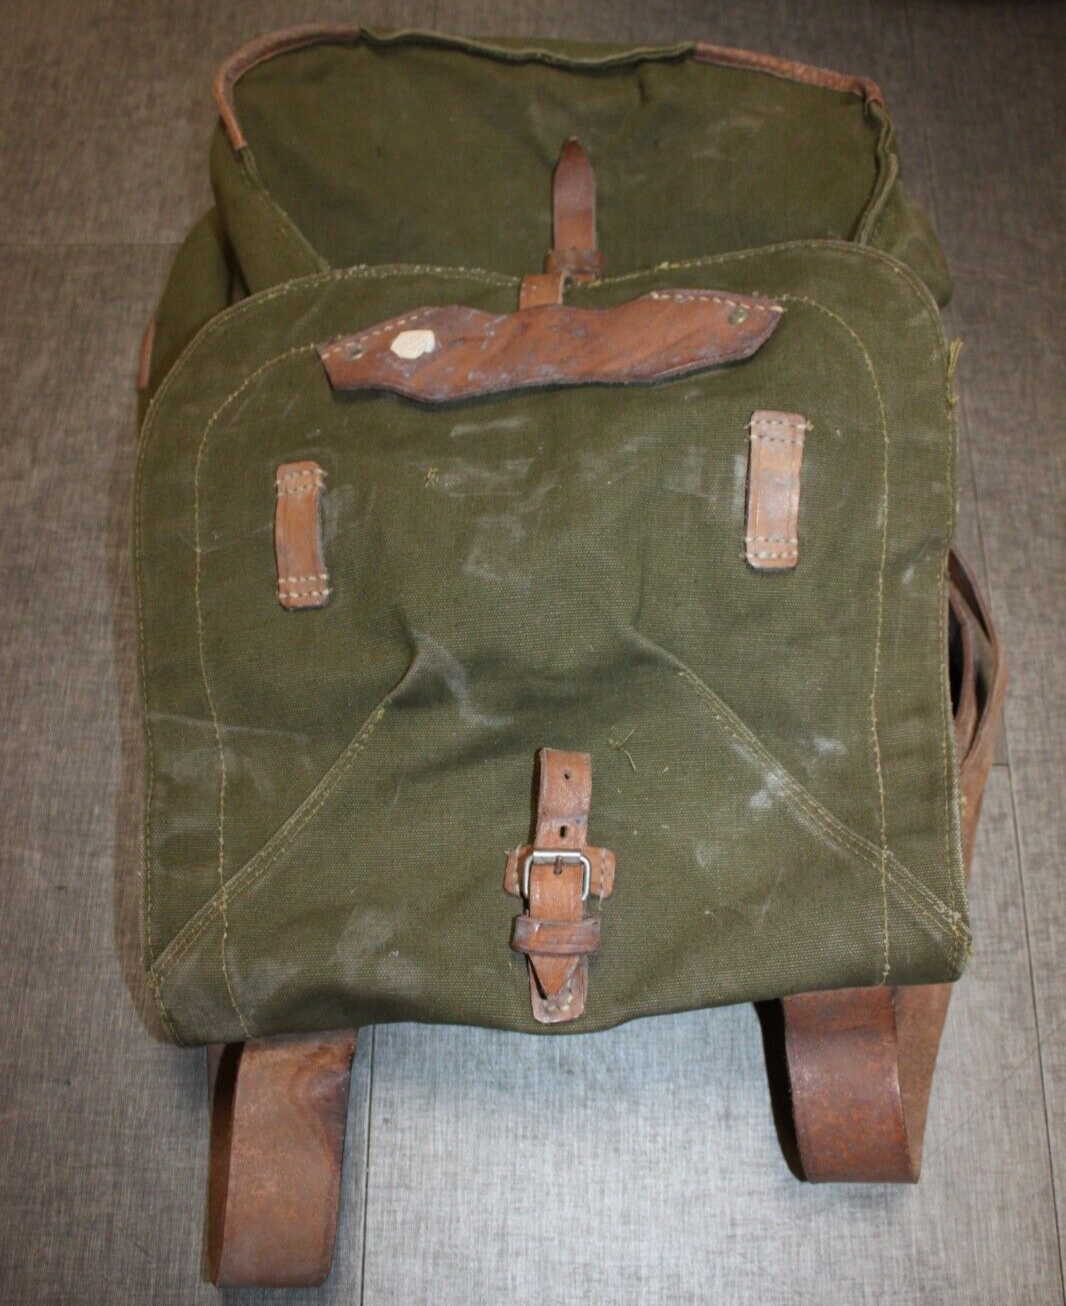 Romanian Military Bag Backpack Pack Canvas Leather